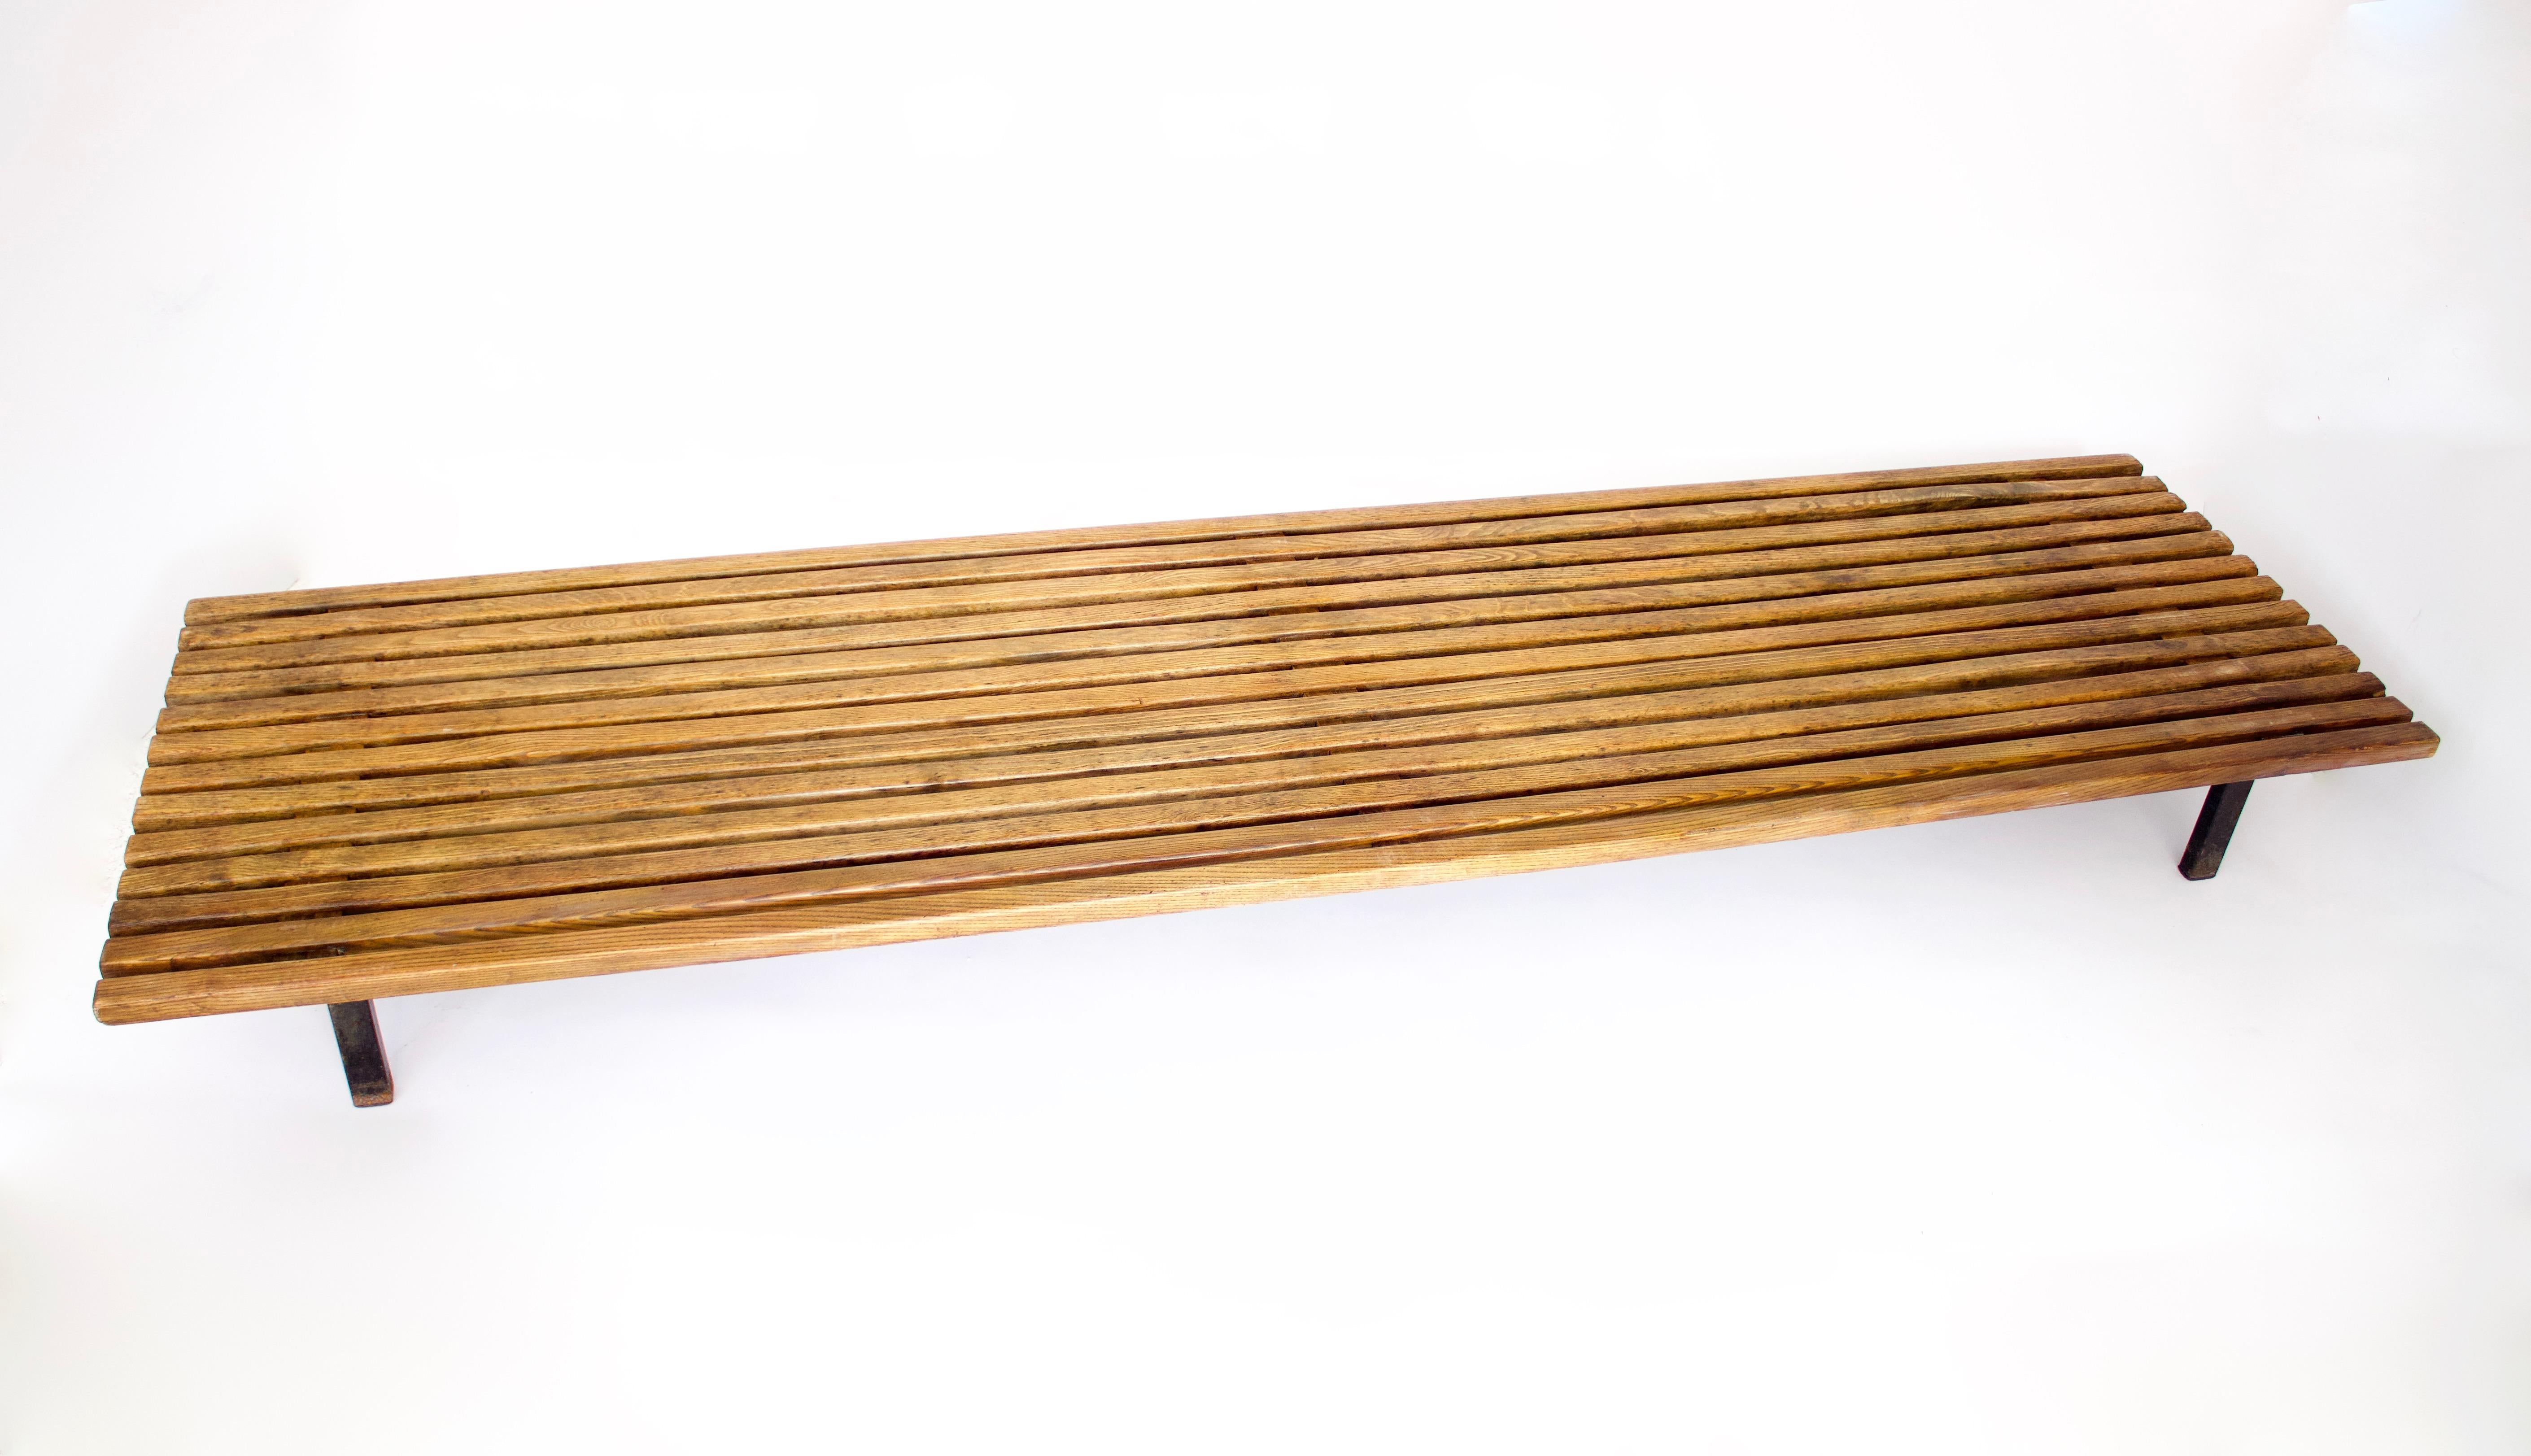 Steel Charlotte Perriand Cansado Bench in Ash Wood For Sale